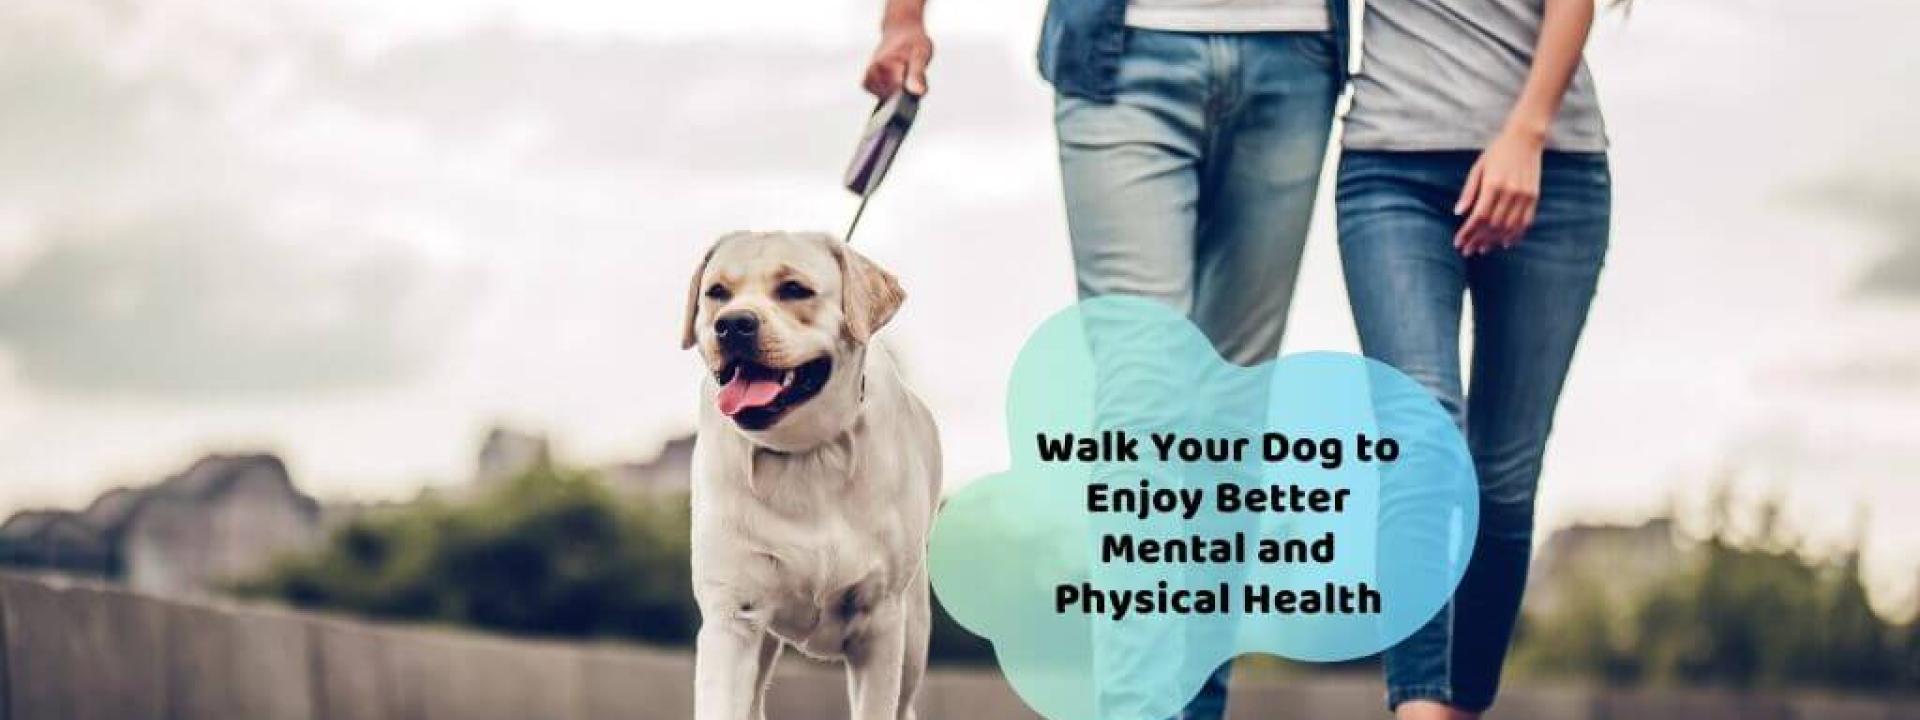 walk your dog for better health